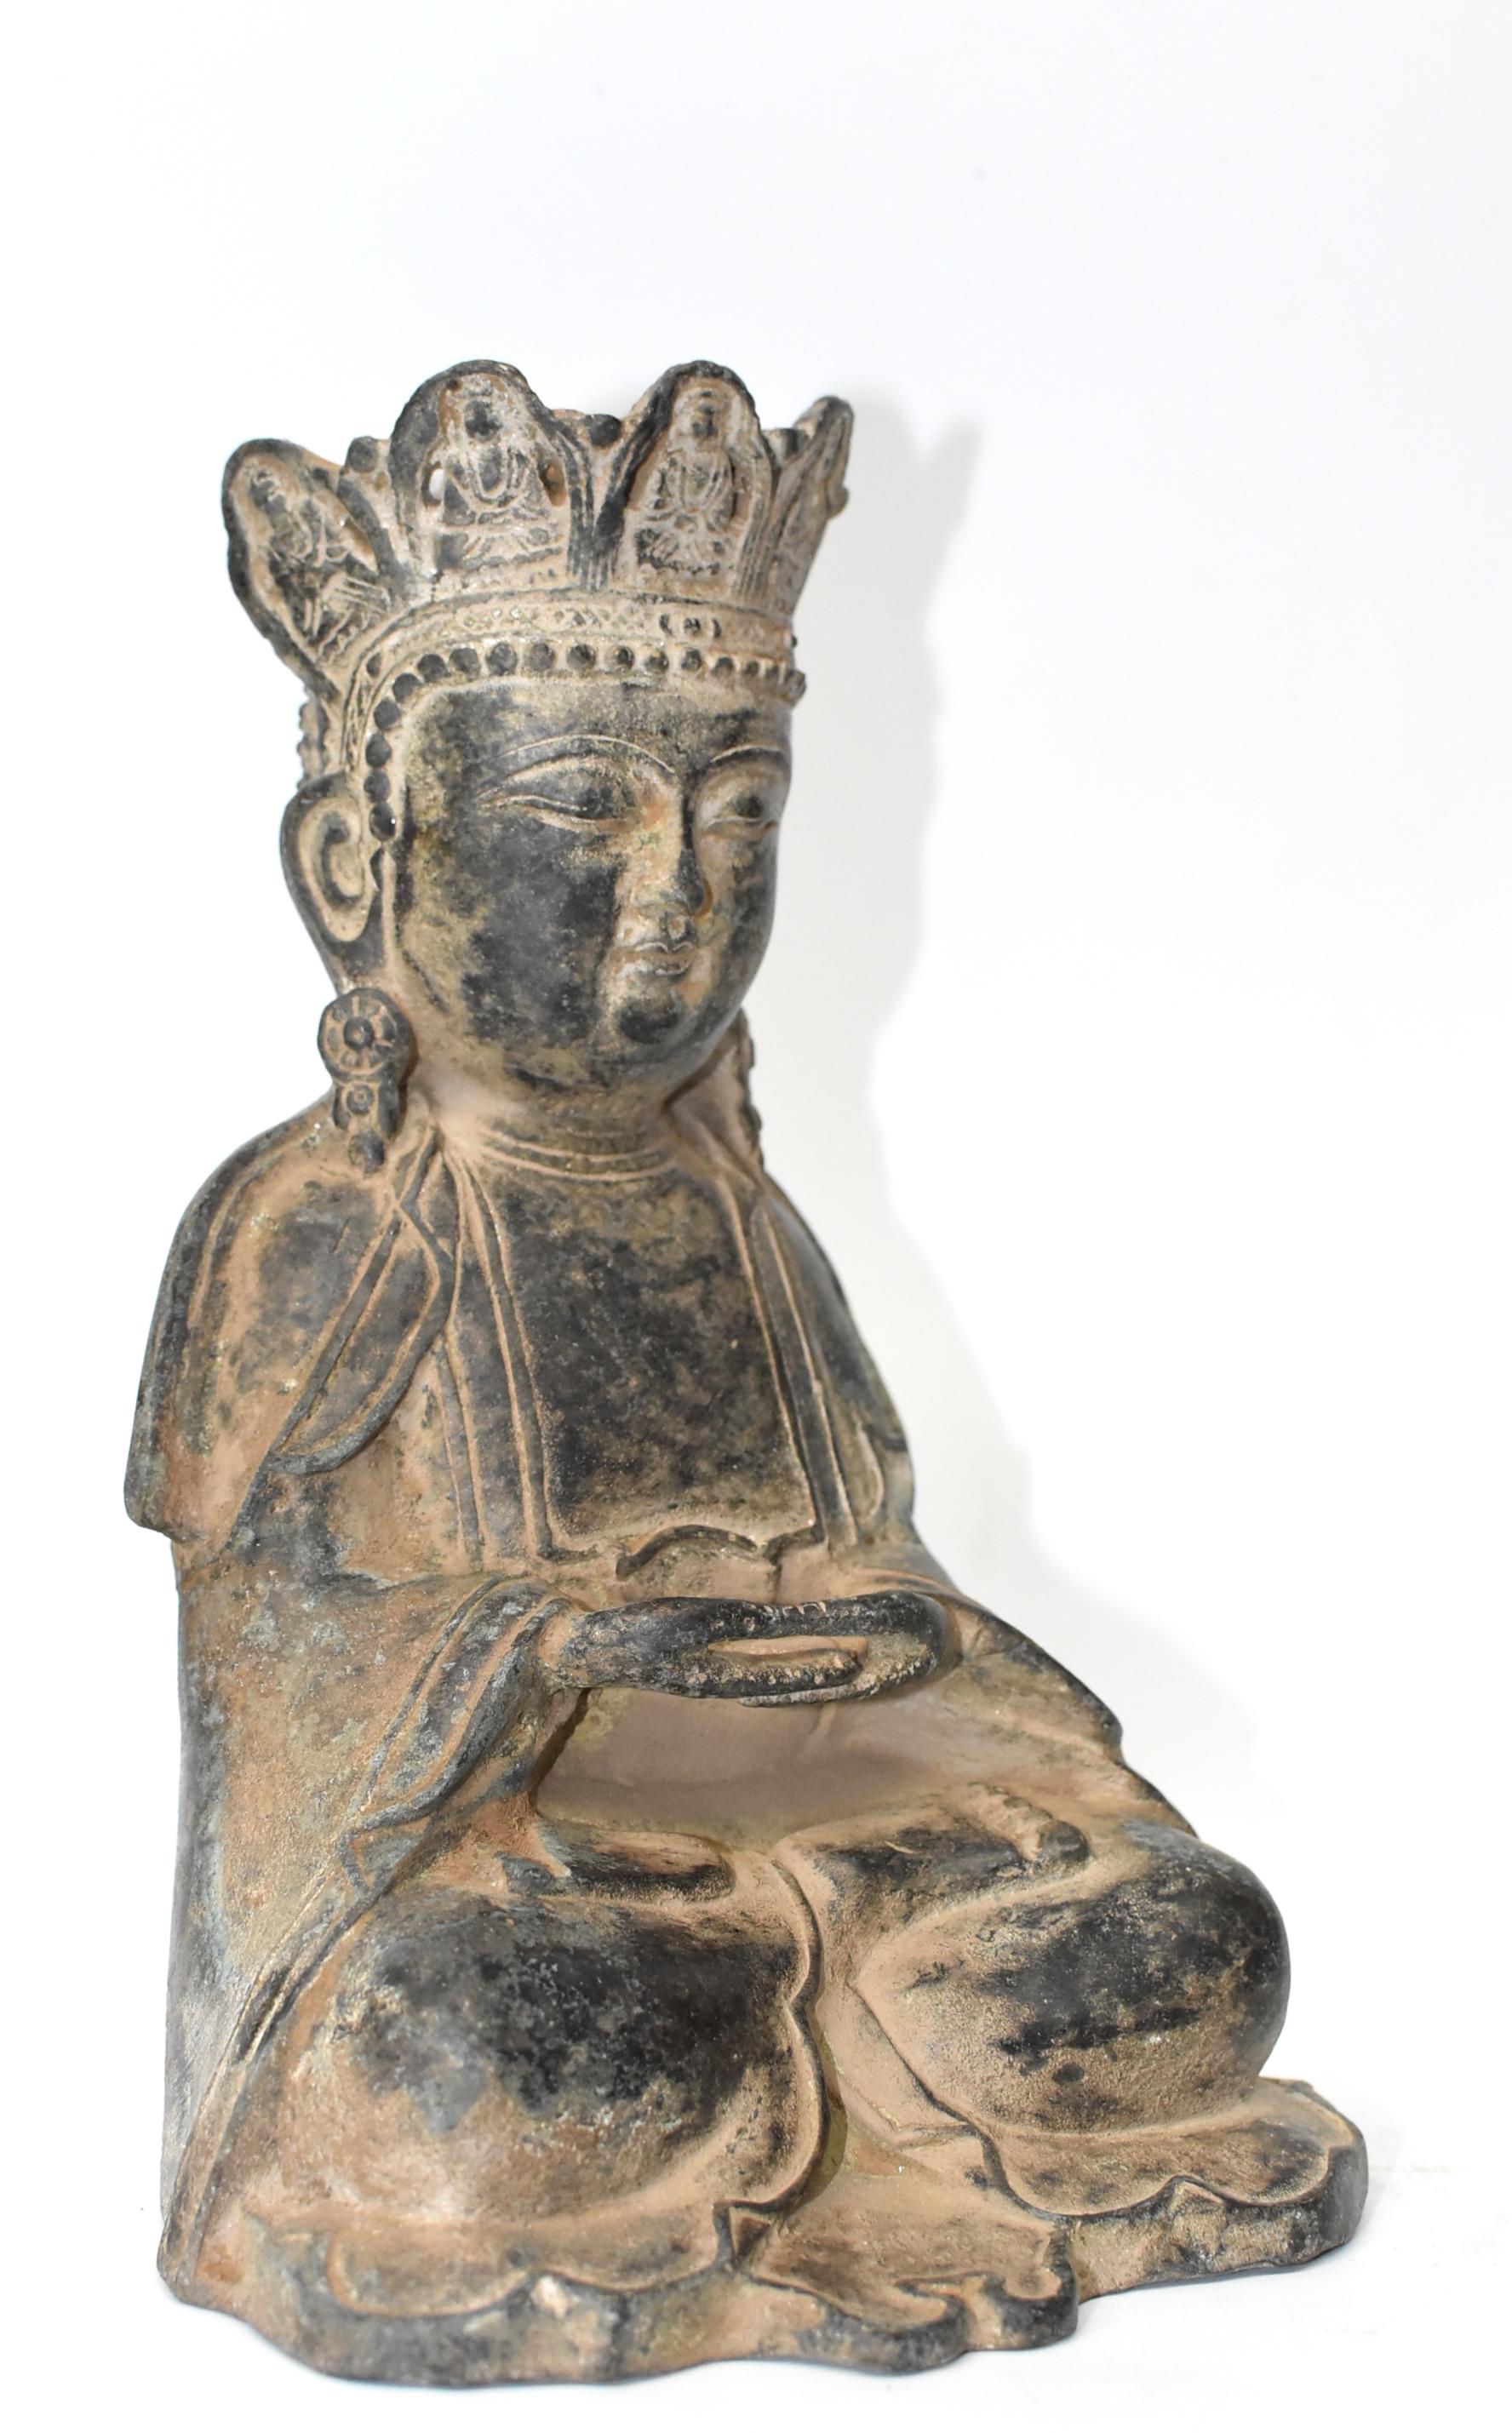 A beautiful antique bronze Earth Buddha. The Buddha has a traditional Tang full face and very peaceful expression. His hands are connected in a unity and peace mudra. Buddha wears a fluid robe, and a decorated crown. Made in the Qin dynasty in the